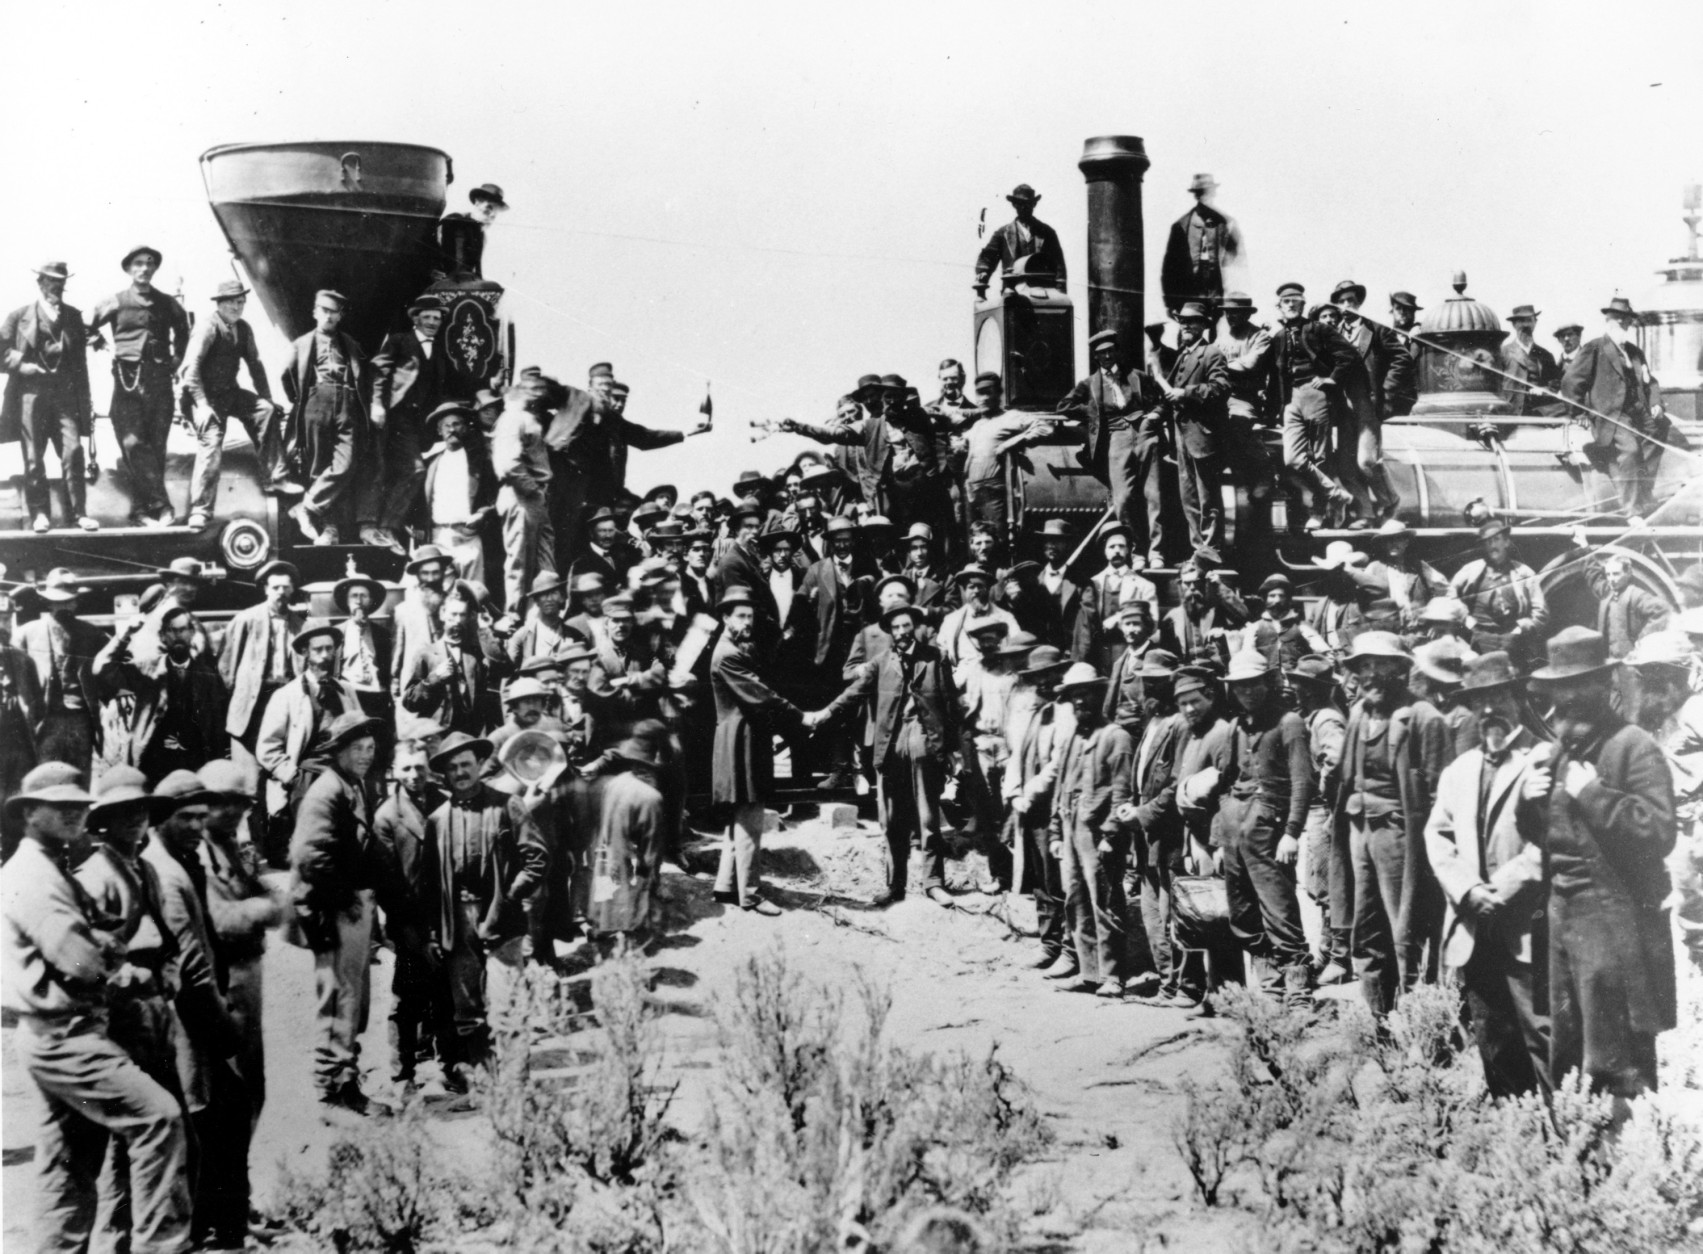 Railroad officials and employees celebrate the completion of the first railroad transcontinental link in Prementory, Utah on May 10, 1869. The Union Pacific's Locomotive No. 119, right, and Central Pacific's Jupiter edged forward over the golden spike that marked the joining of the nation by rail. (AP Photo/Union Pacific/Andrew Russell)